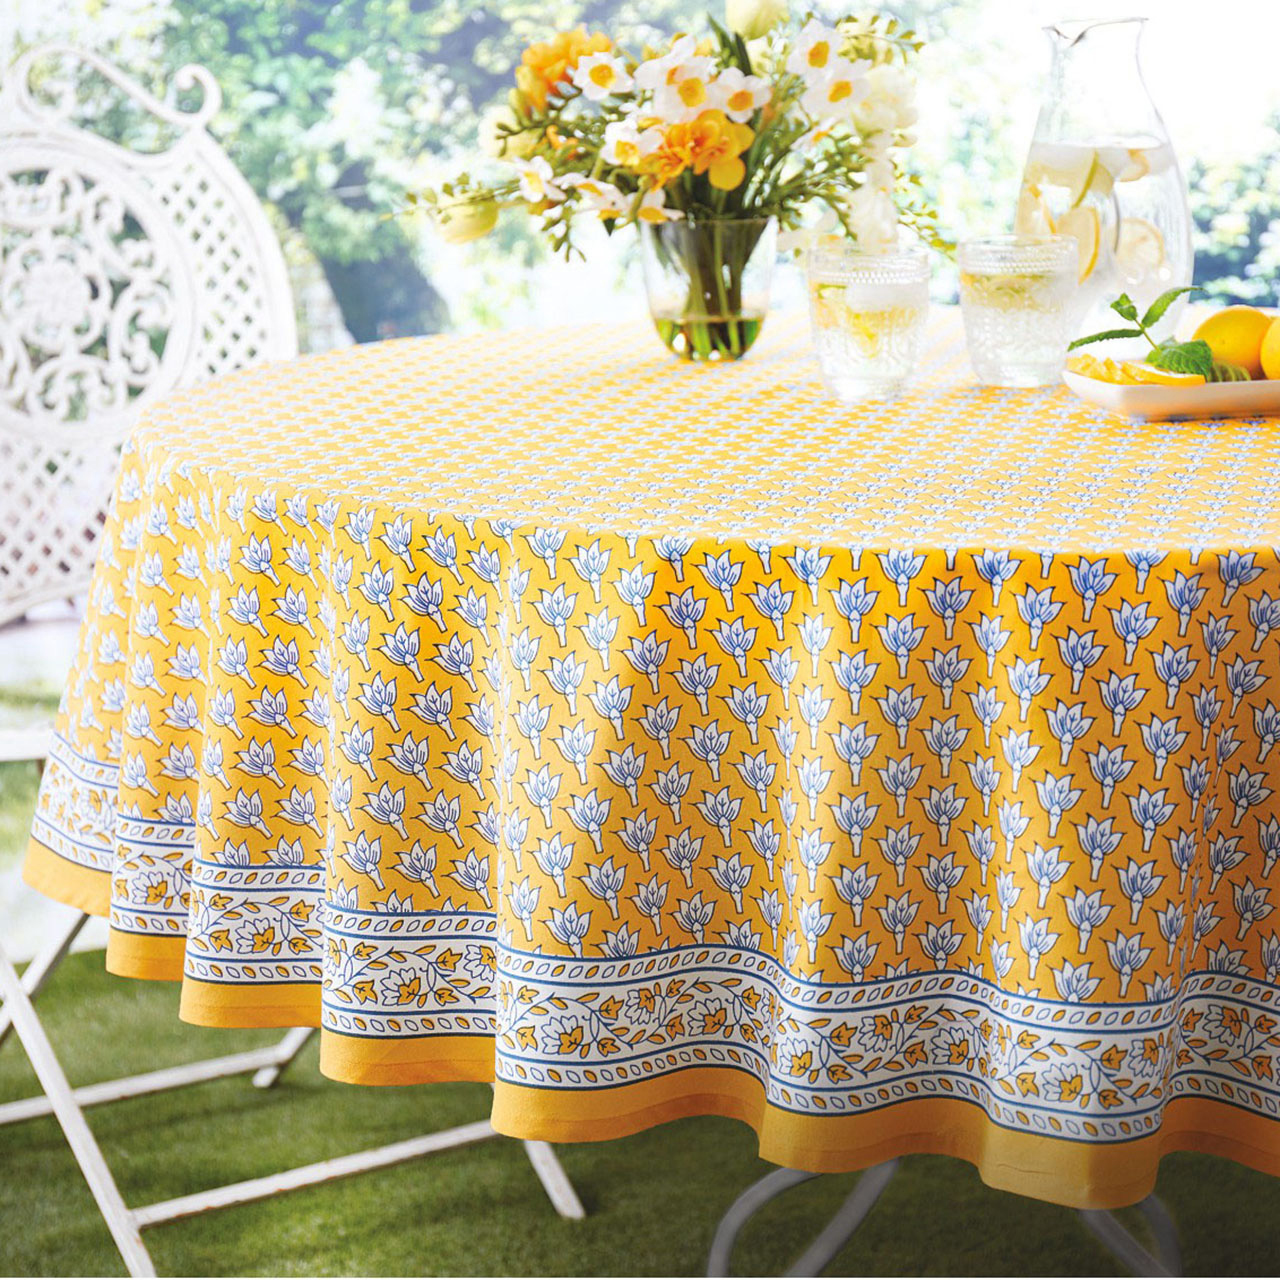 Traditional Indian Hand Printed Tablecloth